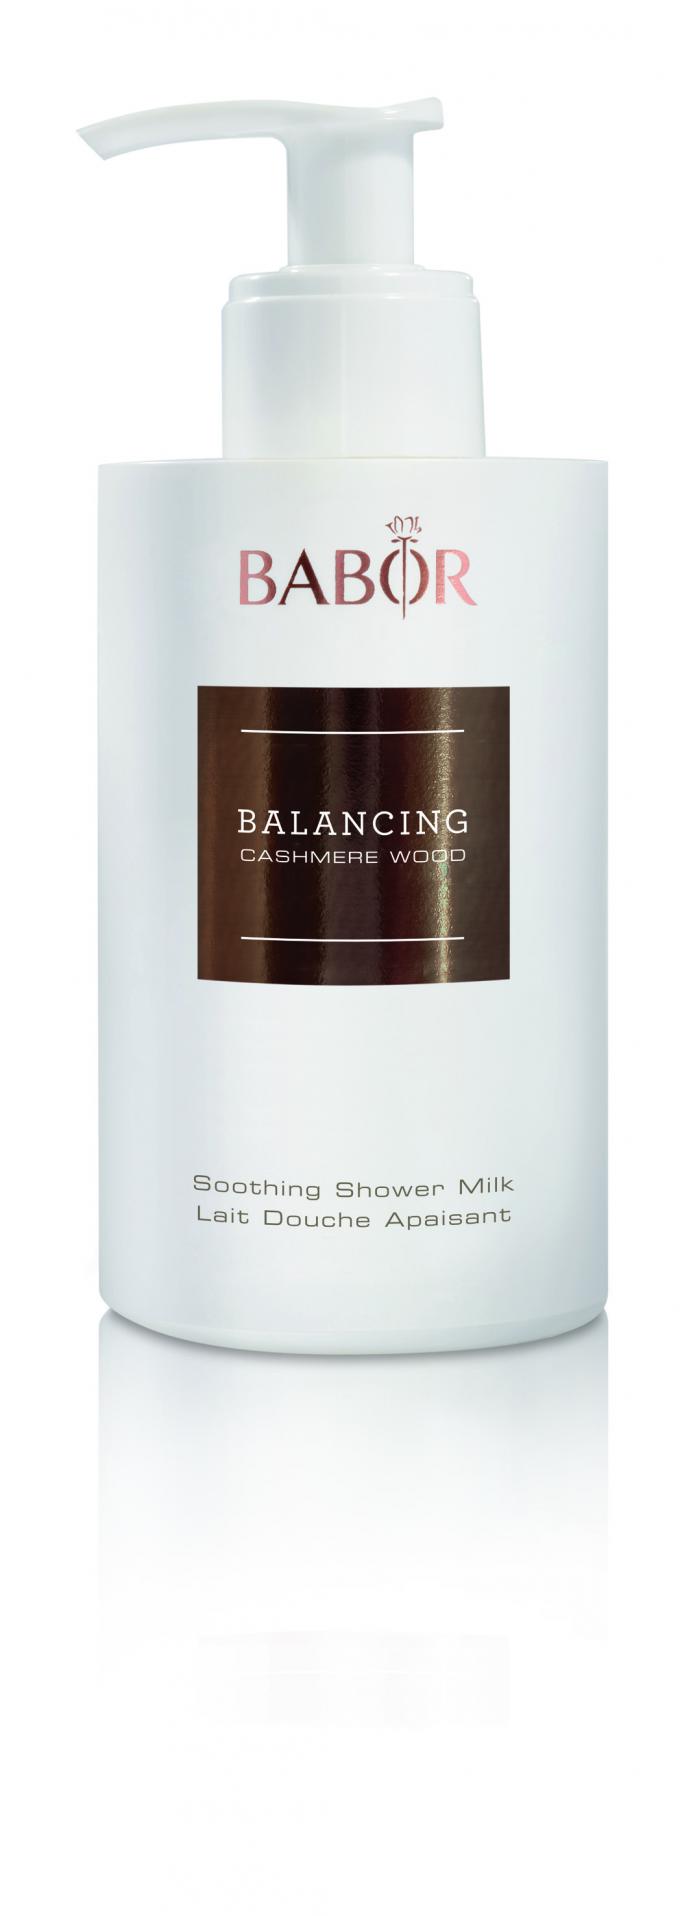 Soothing Shower Milk